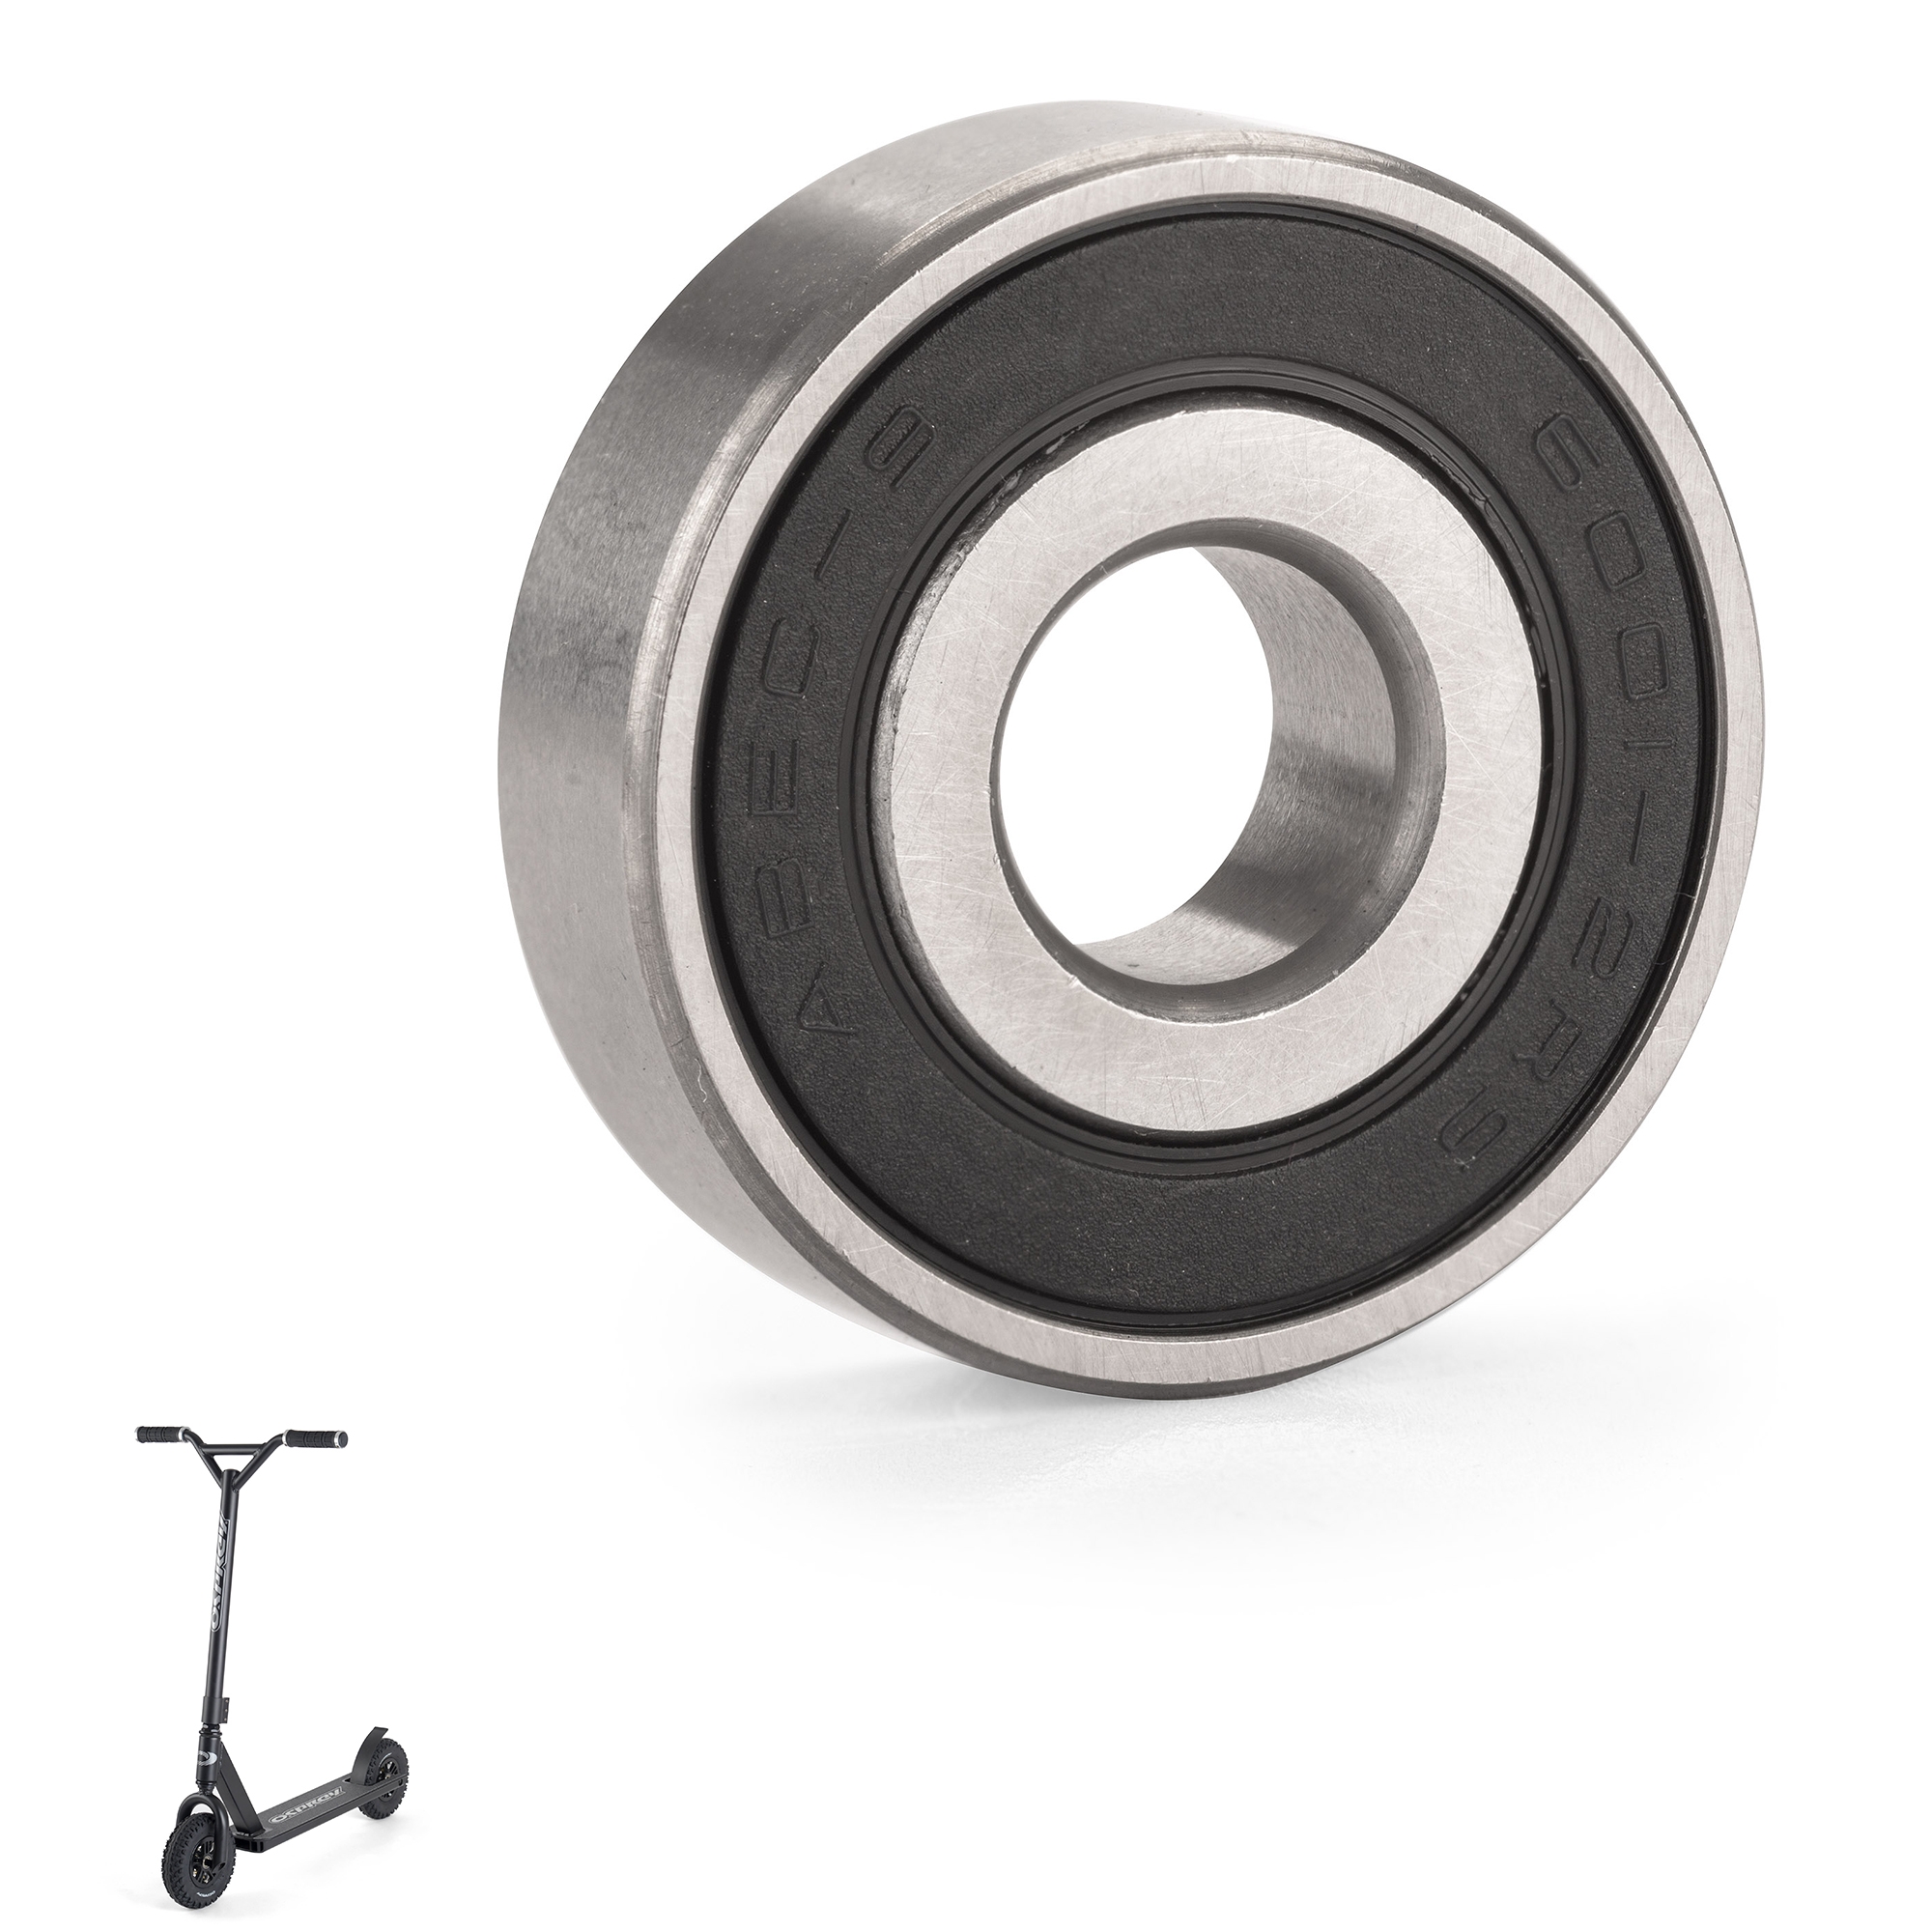 An image of DIRT SCOOTER REPLACEMENT WHEEL BEARING | View All Scooters | Osprey Action Sport...